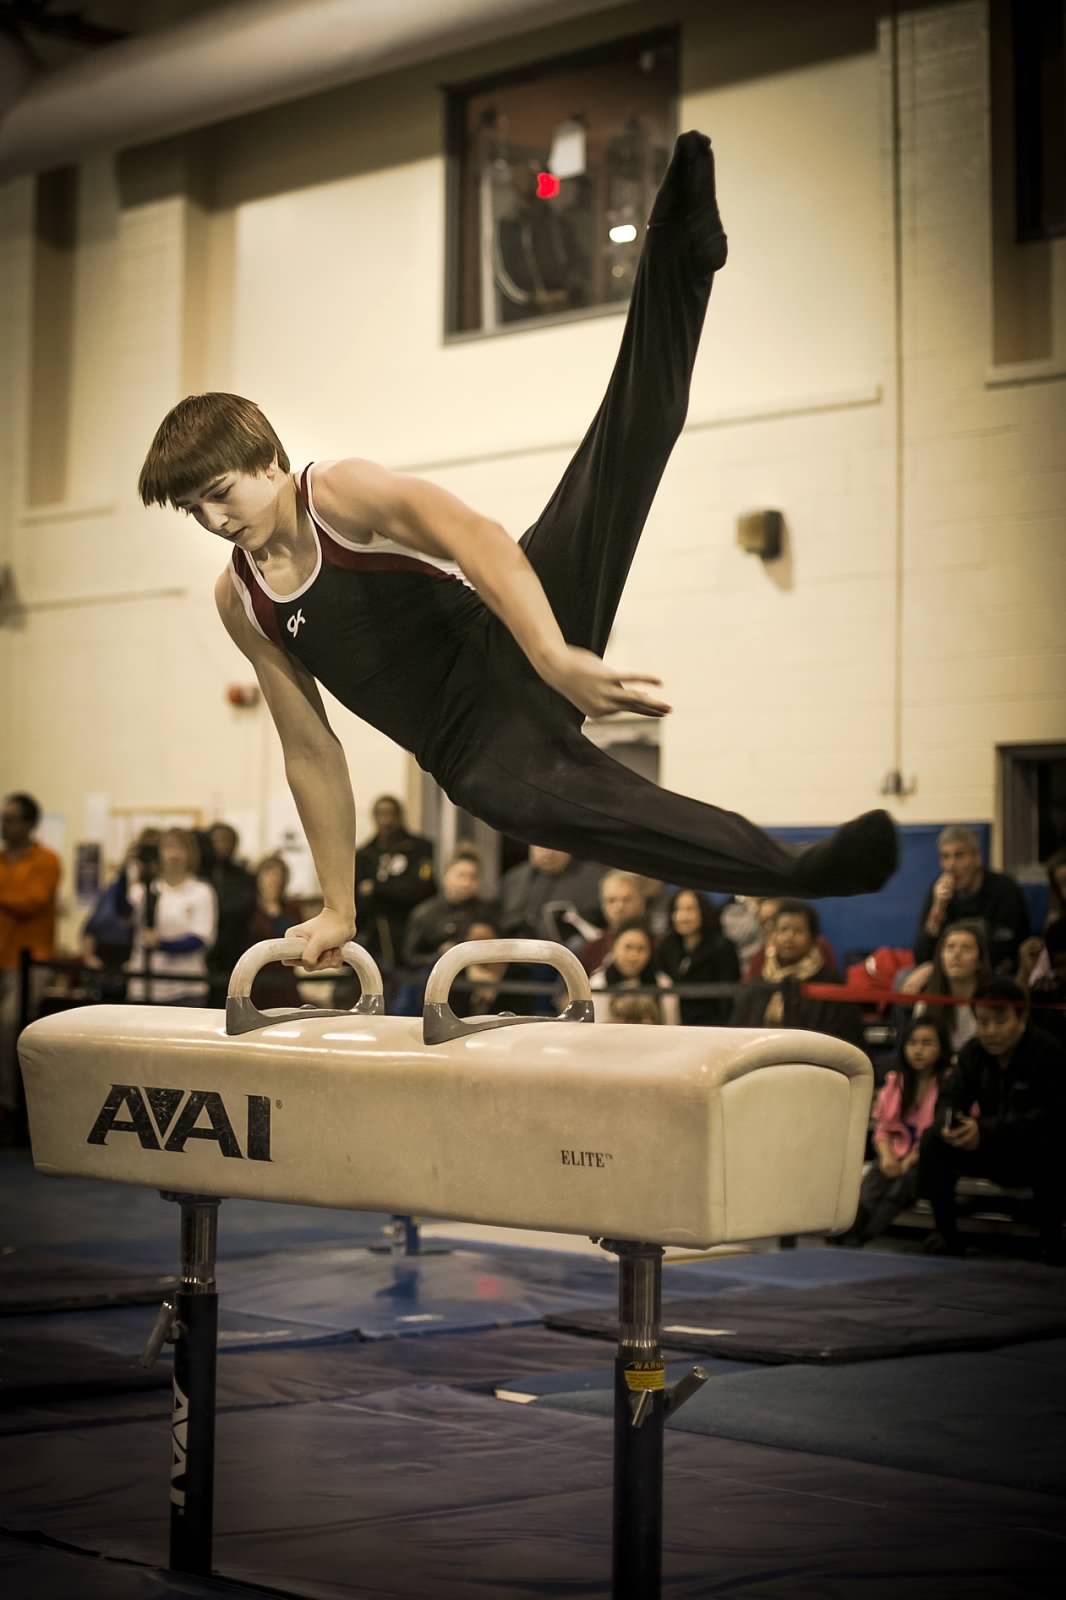  A Level 9 on the pommel horse during the 2013 BWI. 